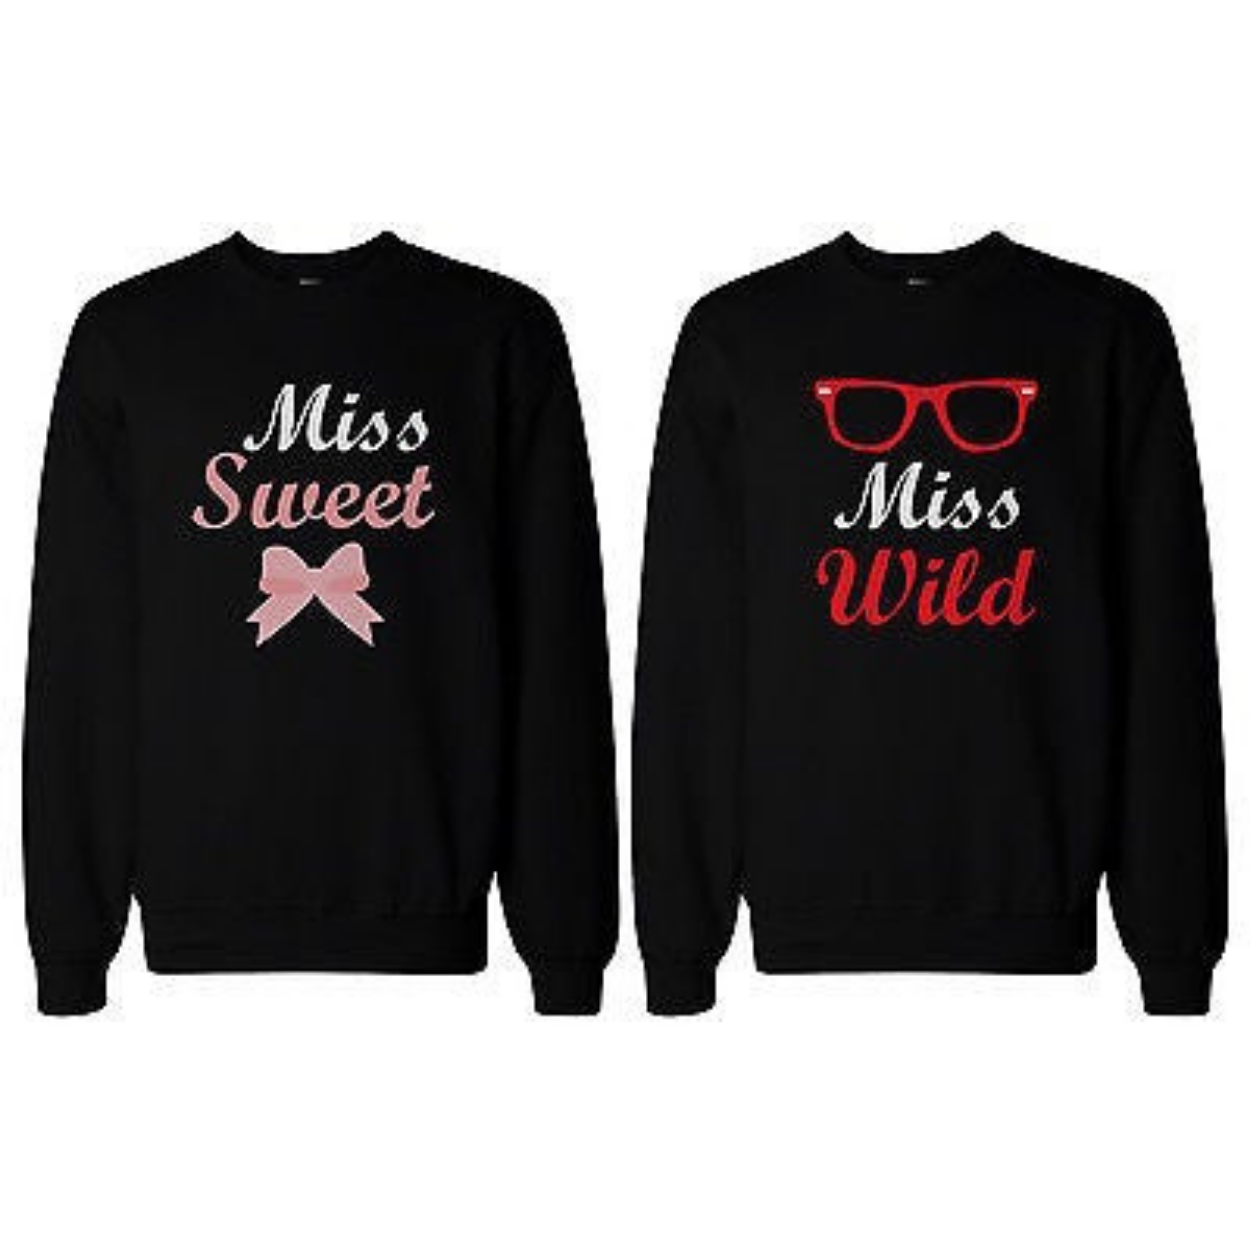 Bff Matching Sweatshirts Sweet And Wild Sweaters For Best Friends - 365 In Love